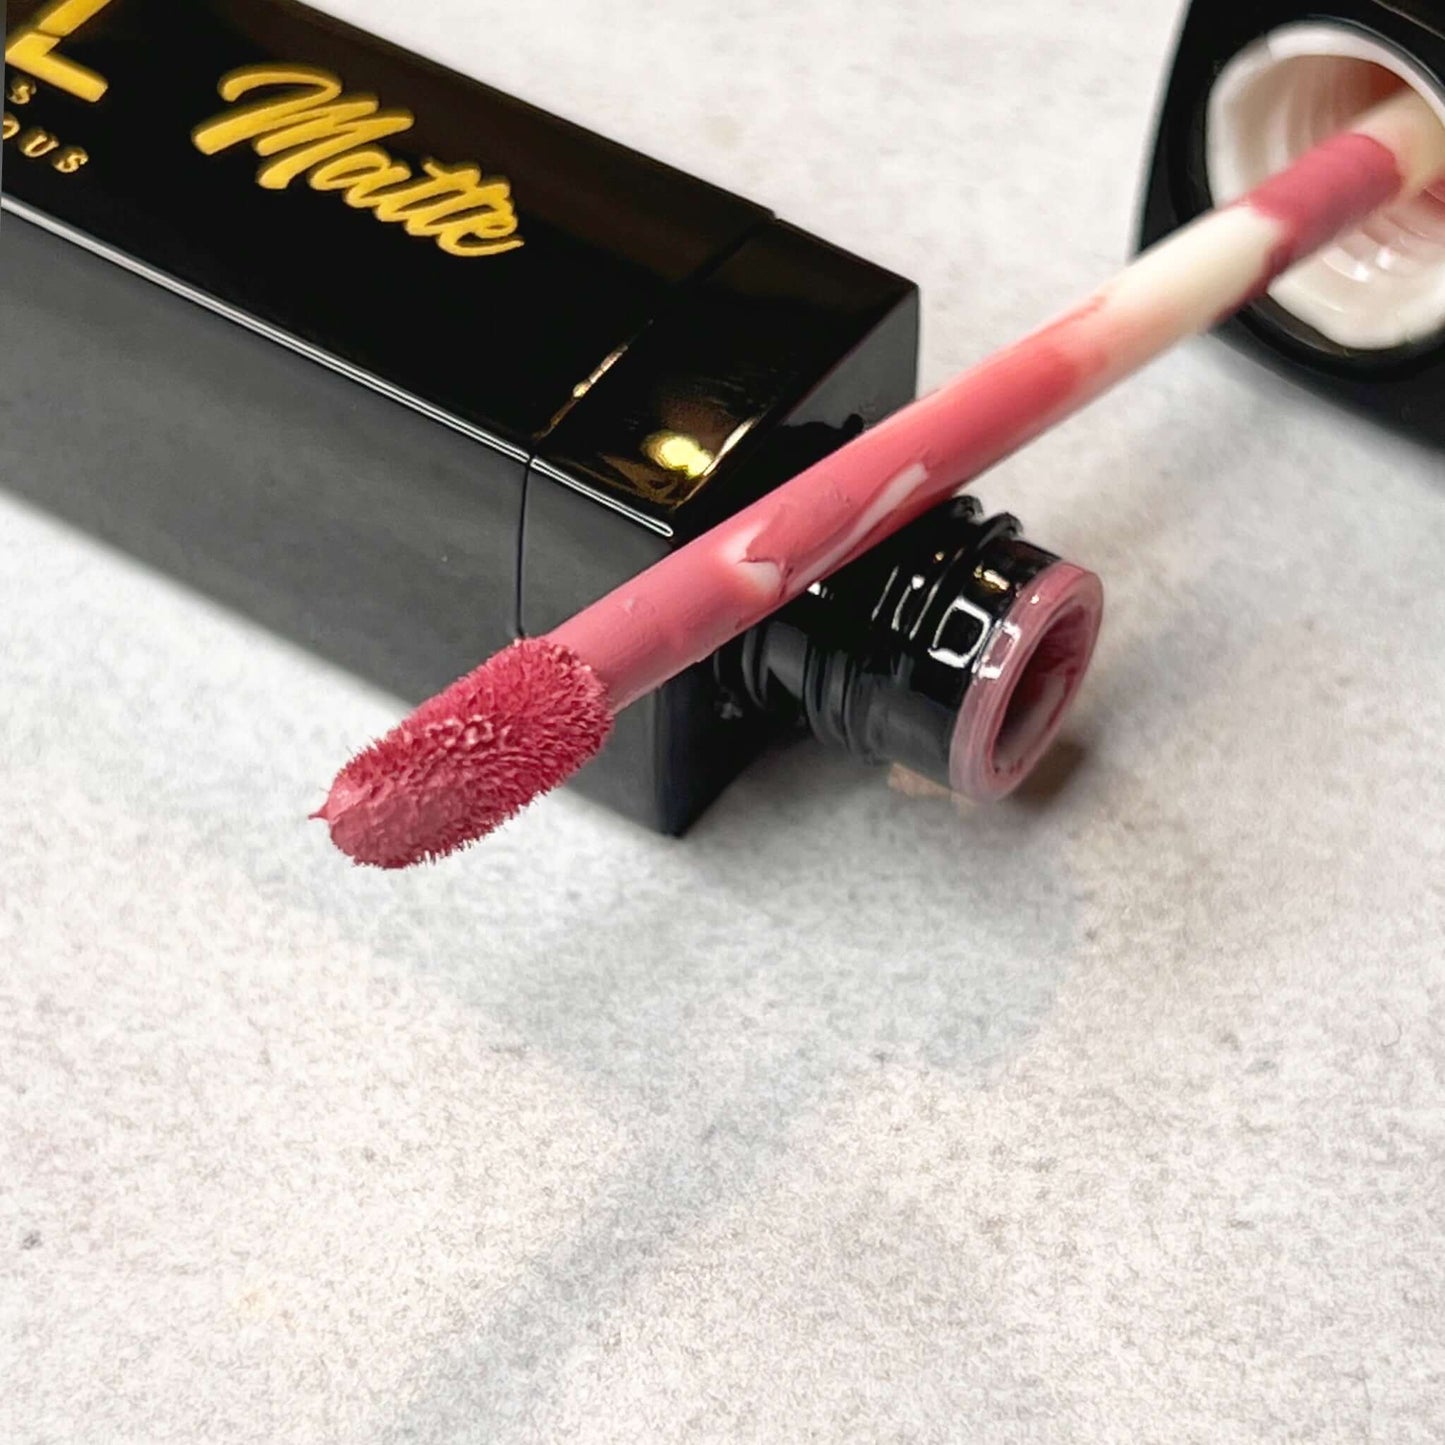 A close up of the Lipstick wand reveals a muted frosted pink color on the tip of a soft fluffy brush resting against a bold and luscious cosmetics matte lipstick bottle